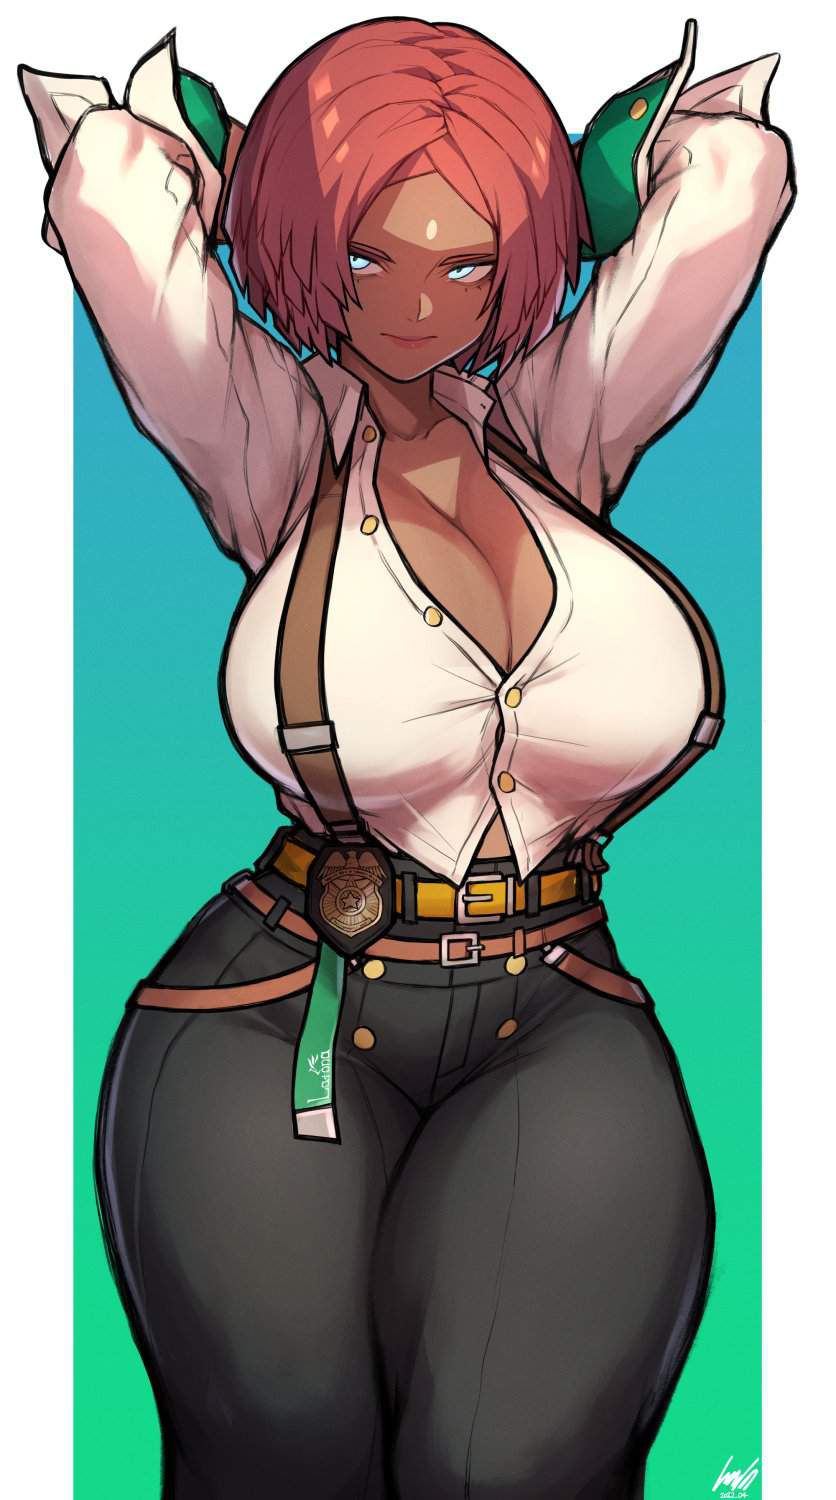 【Erotic Image】Geovana's character image that you want to use as a reference for Guilty Gear's erotic cosplay 9